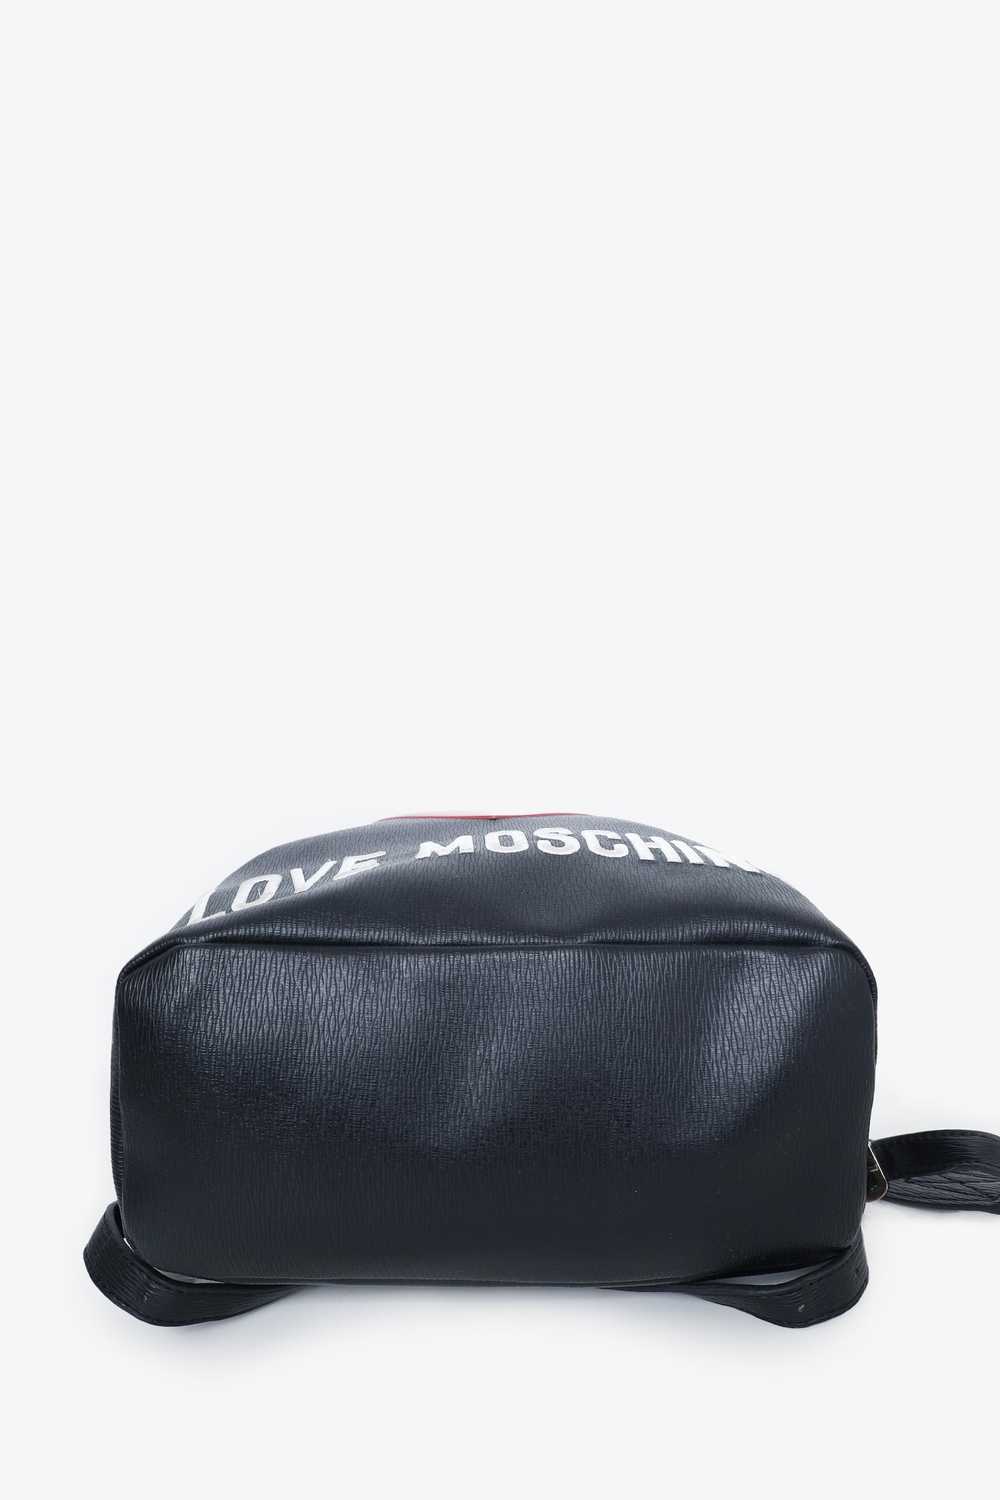 Love Moschino Black Leather Red Heart Backpack - image 5